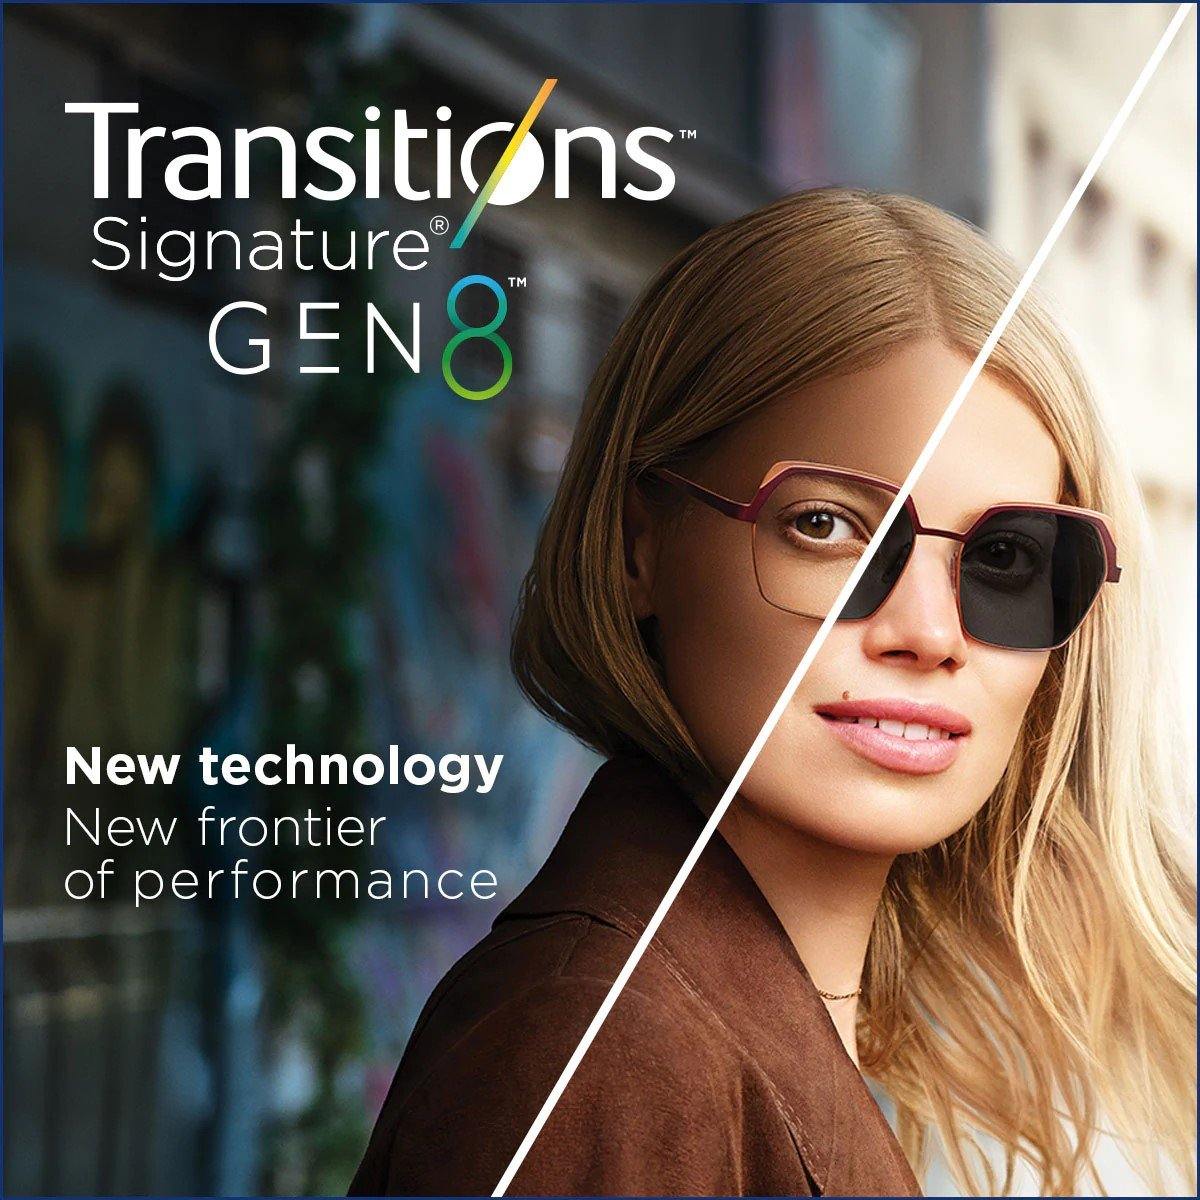 Transitions Gen 8 - Vision Express Optical Philippines